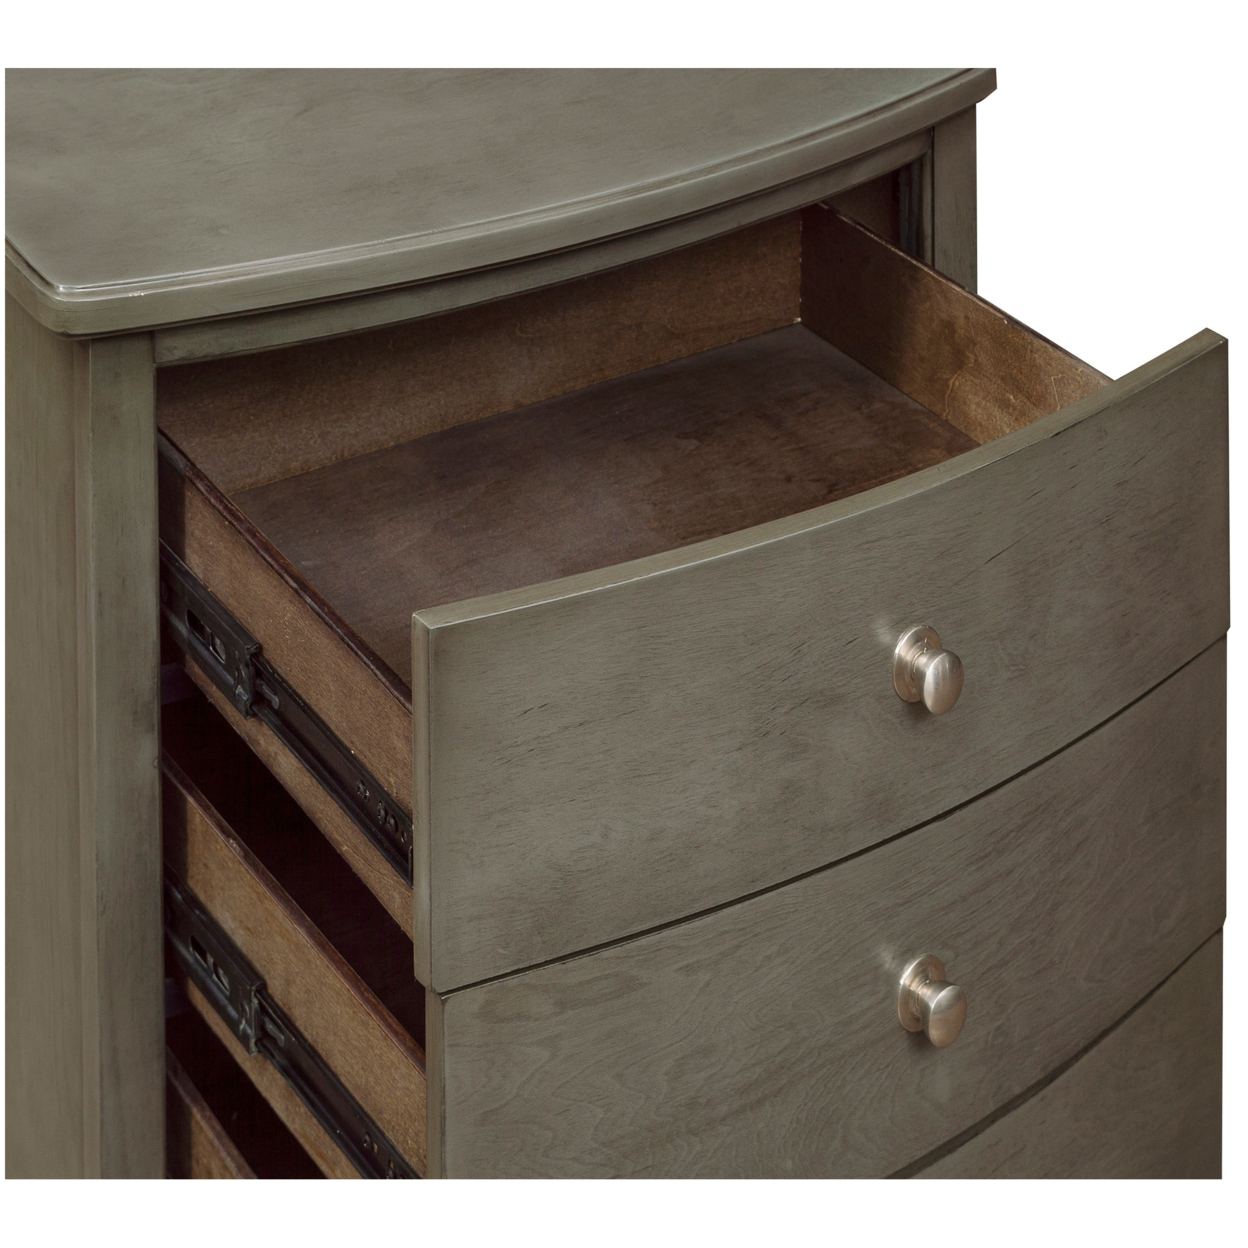 Wooden Nightstand With 3 Spacious Drawers And Knobs, Gray- Saltoro Sherpi